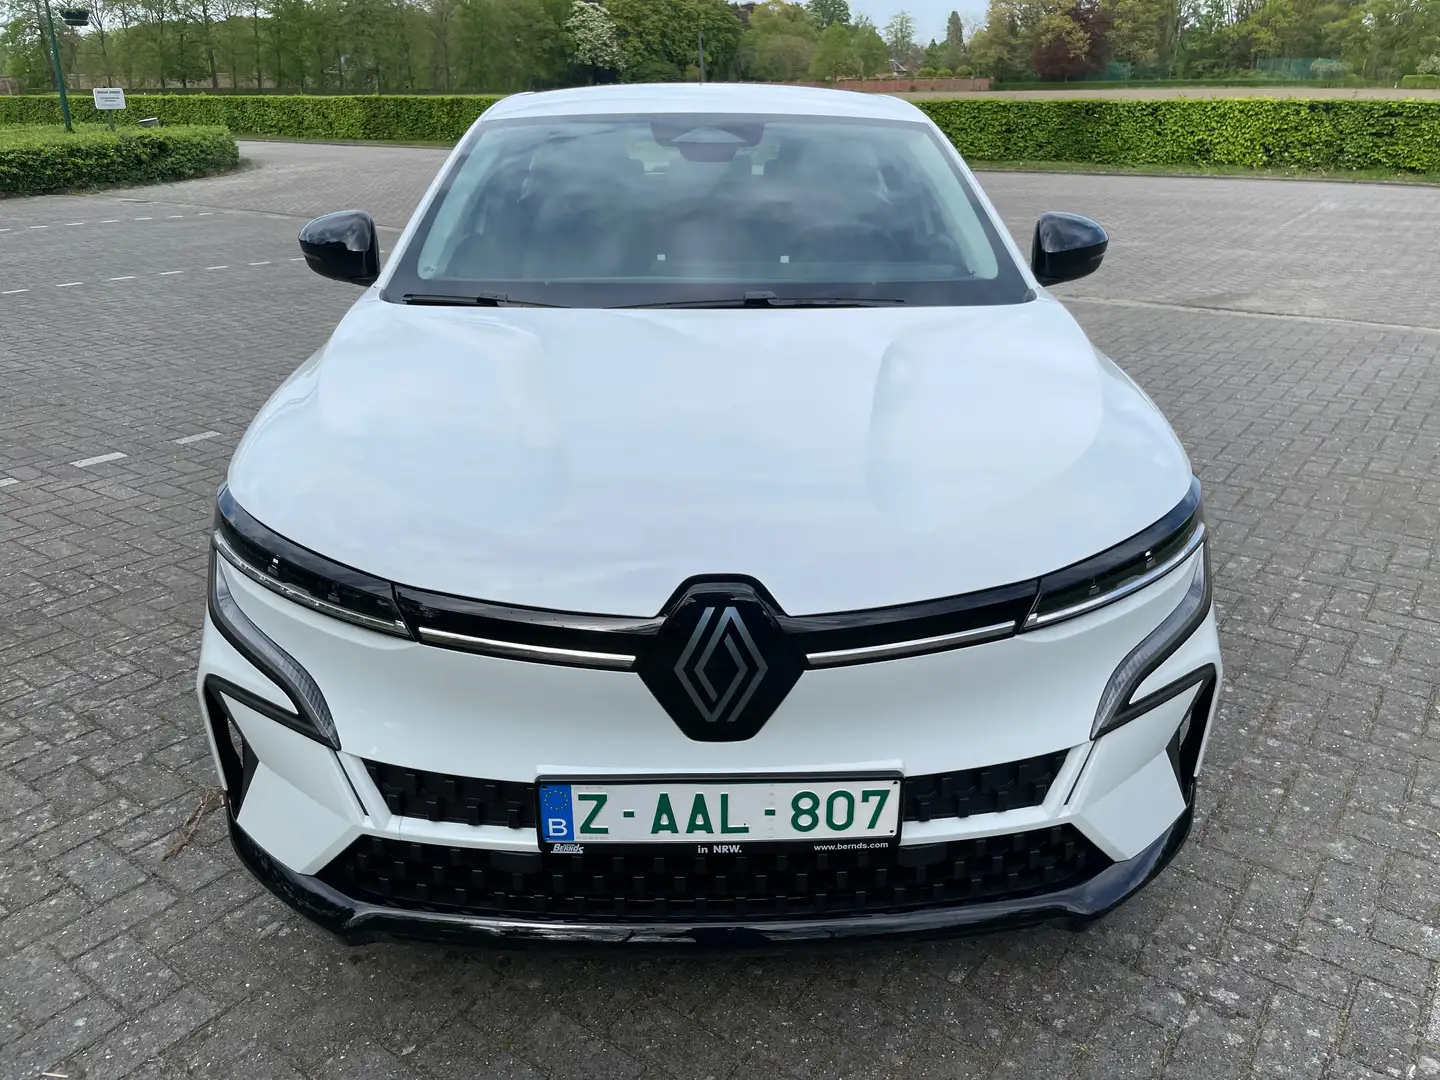 Renault Megane E-Tech 40 kWh Equilibre R130 Standard charge DEMO! Weiß - 2